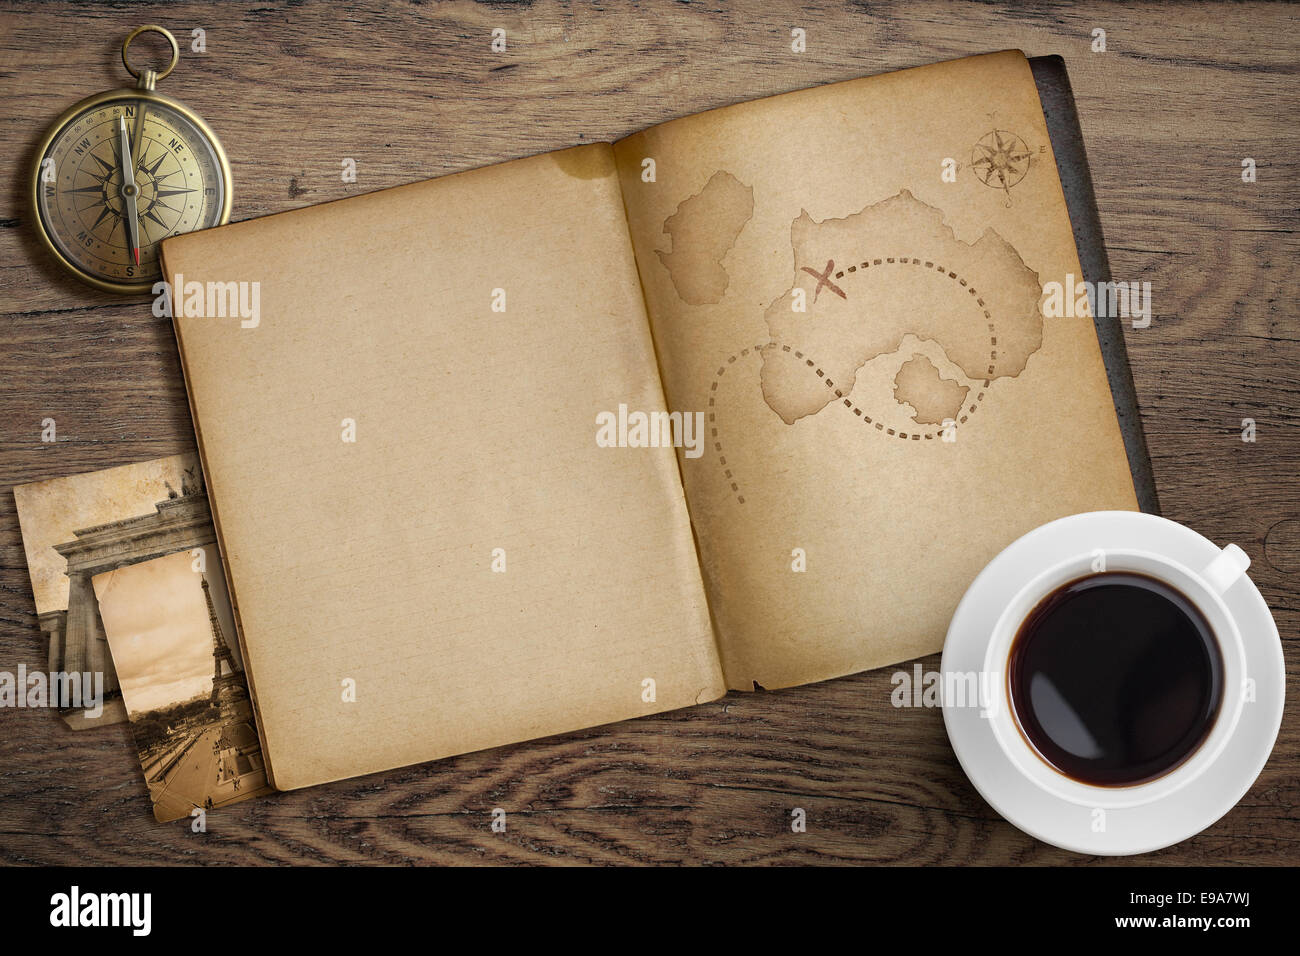 Adventure and travel nautical theme. Diary with map and compass on wooden table. Stock Photo